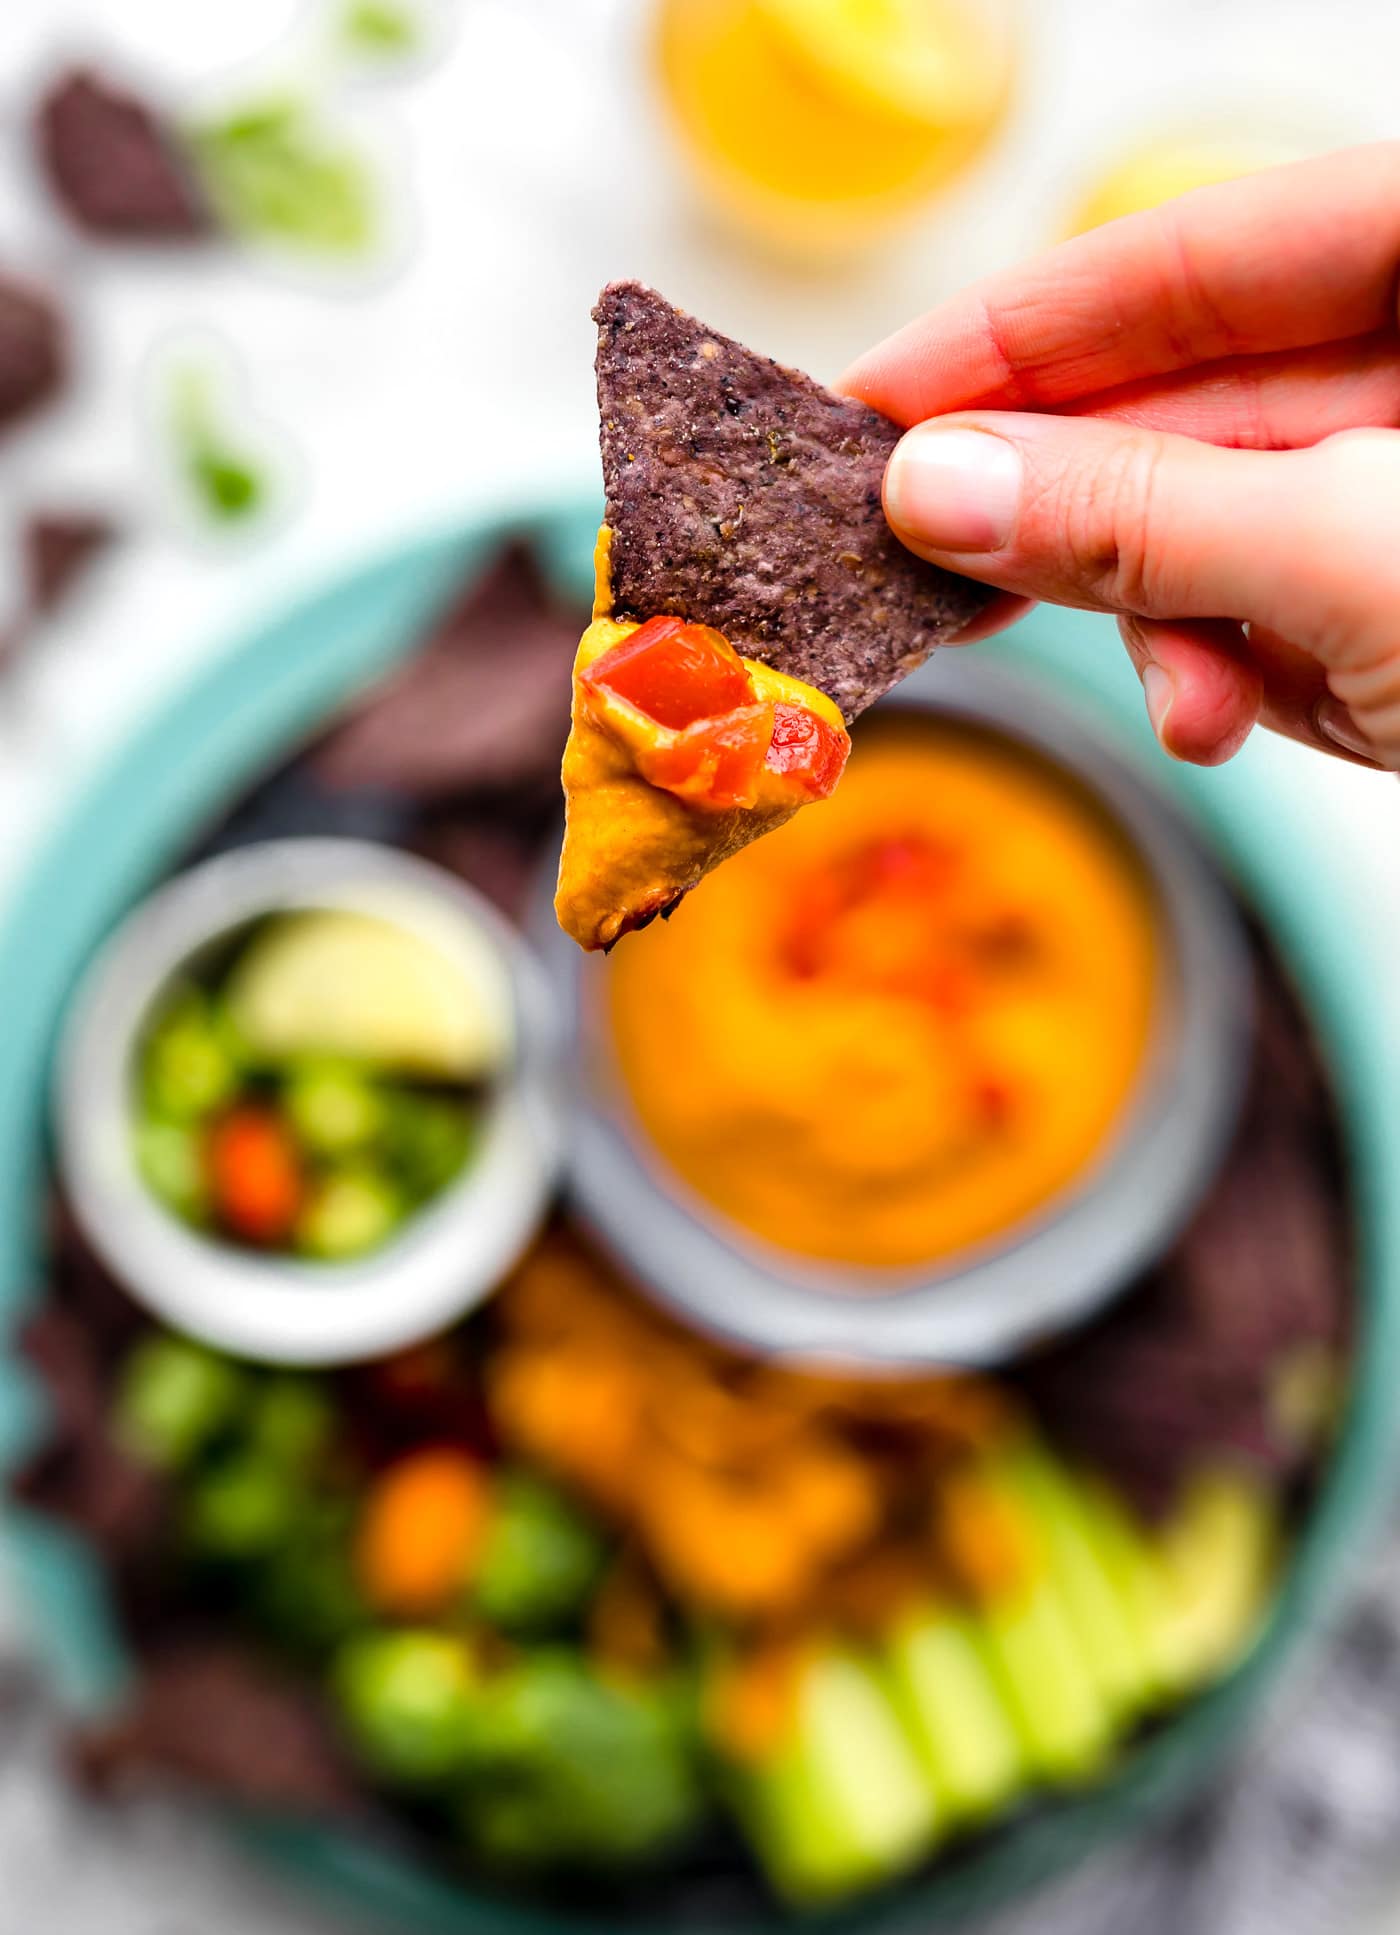 Vegan salsa con queso is a warm cheese dip recipe that's quick & easy! Vegan cheese dip is plant-based using fresh vegetables & Tex-Mex spices. Paleo option.